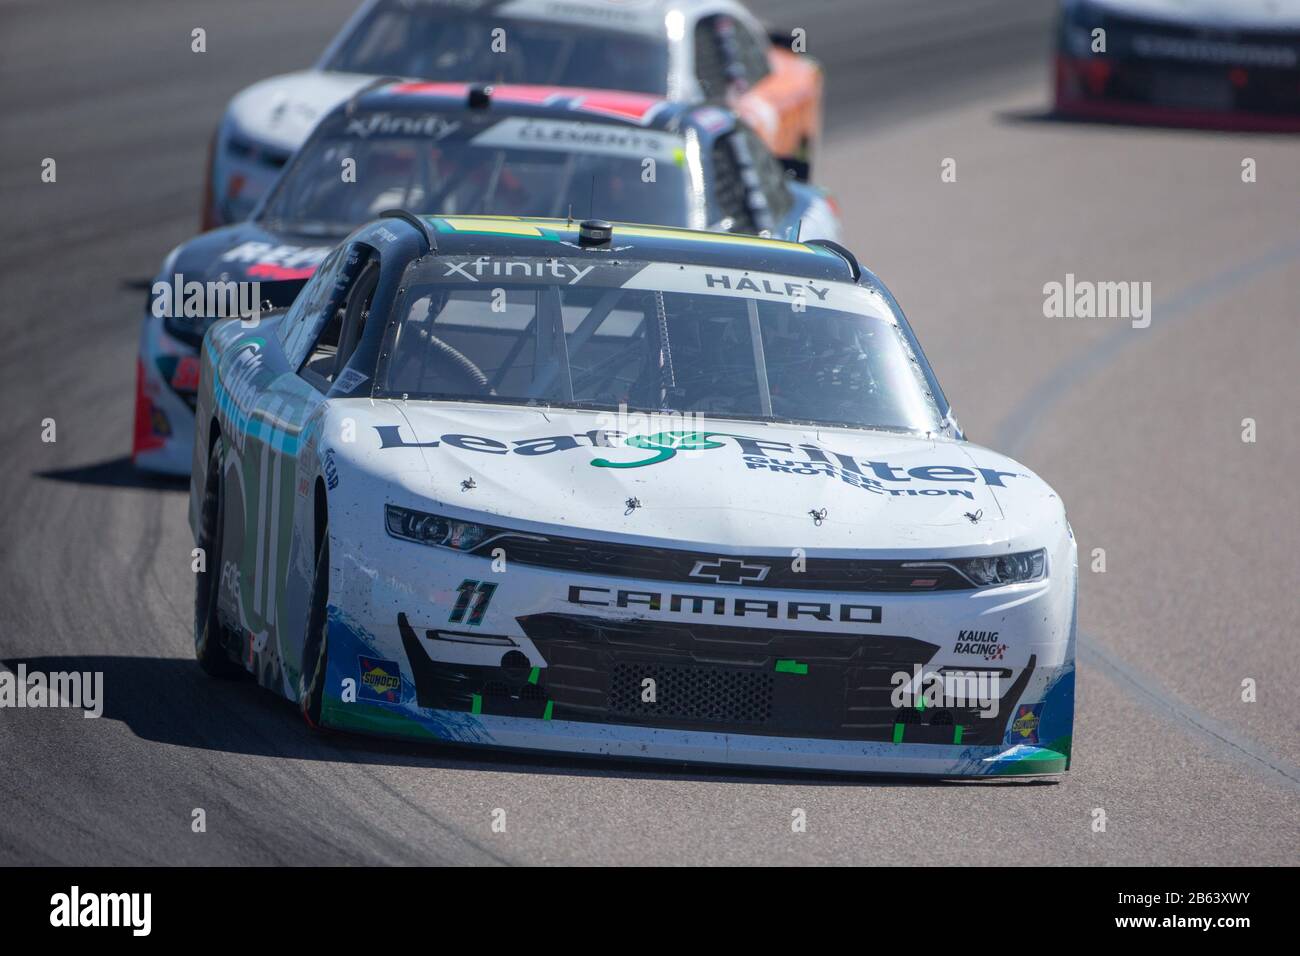 Avondale, Arizona, USA. 7th Mar, 2020. Justin Haley (11) races for position for the LS Tractor 200 at Phoenix Raceway in Avondale, Arizona. (Credit Image: © Logan Arce/ASP) Stock Photo